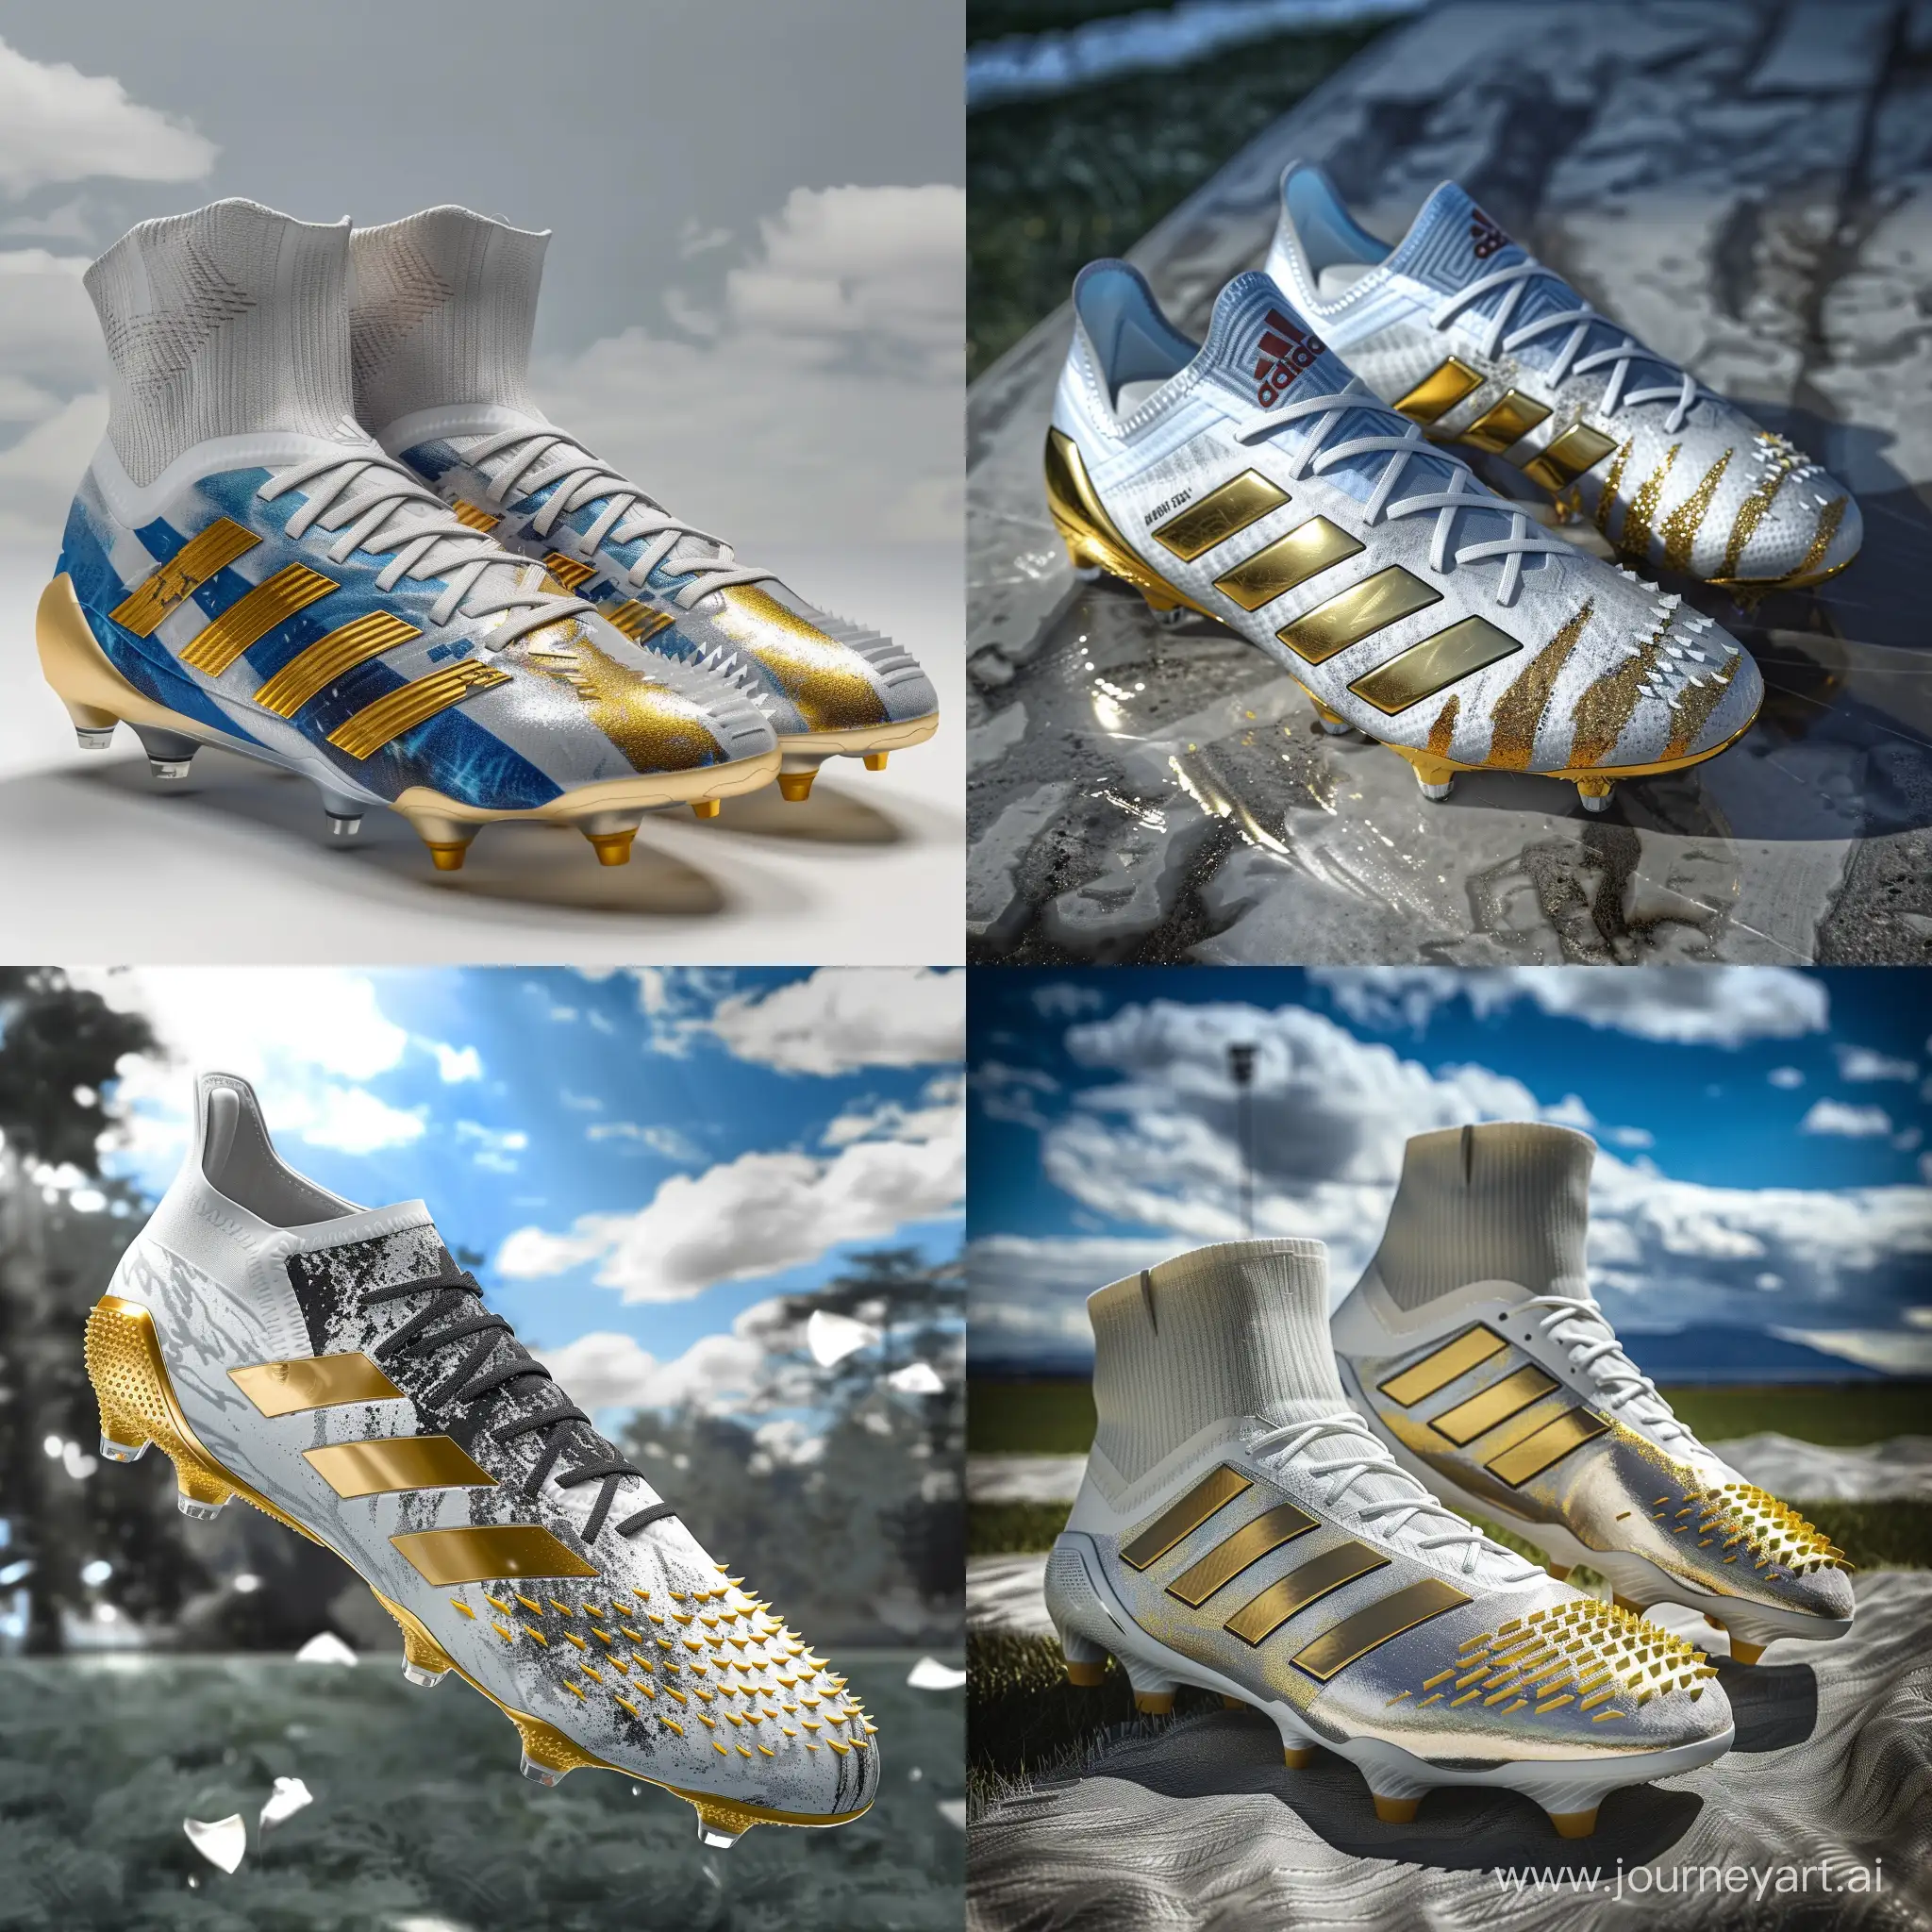 Hyper-Realistic-Argentina-Flag-Adidas-Football-Boots-in-Gold-White-Sky-Photography